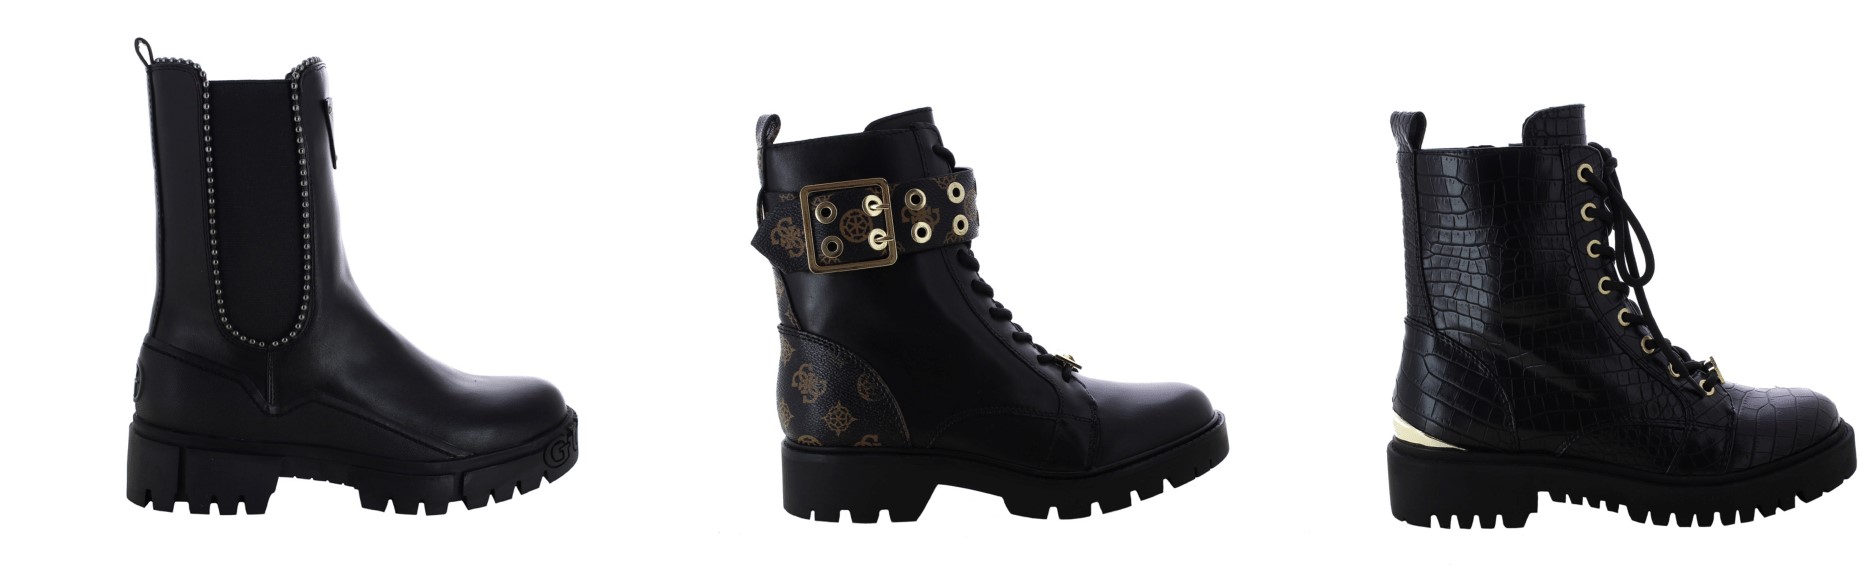 guess ankle boots autumn collection